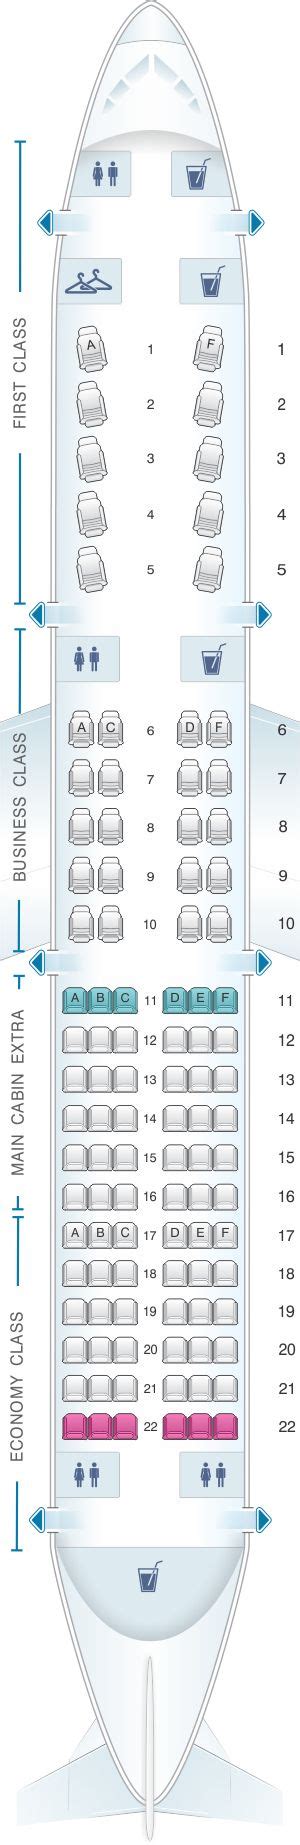 Seat Map American Airlines Airbus A321 Transcontinental United